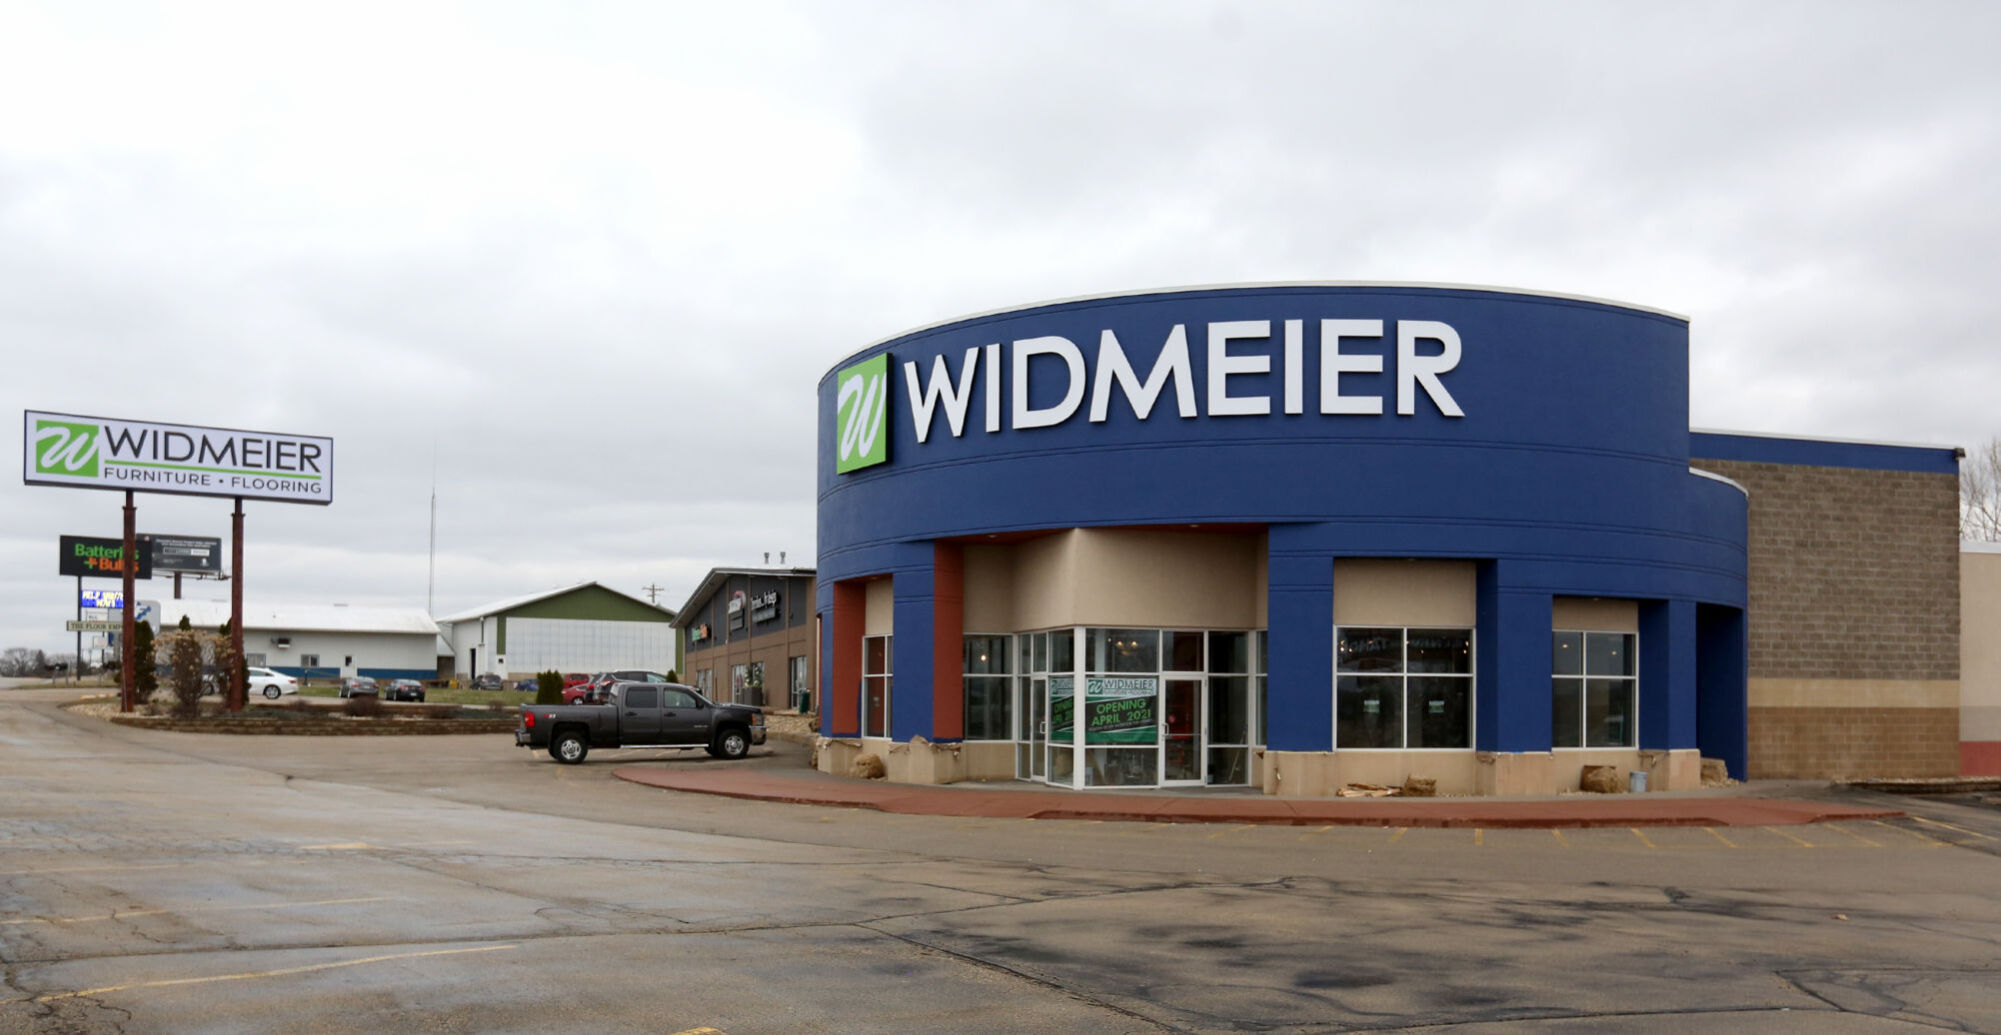 Widmeier Furniture & Flooring will be opening its new location during the first week of April at the site of the former Slumberland Furniture store, 4390 Dodge St. in Dubuque. PHOTO CREDIT: JESSICA REILLY